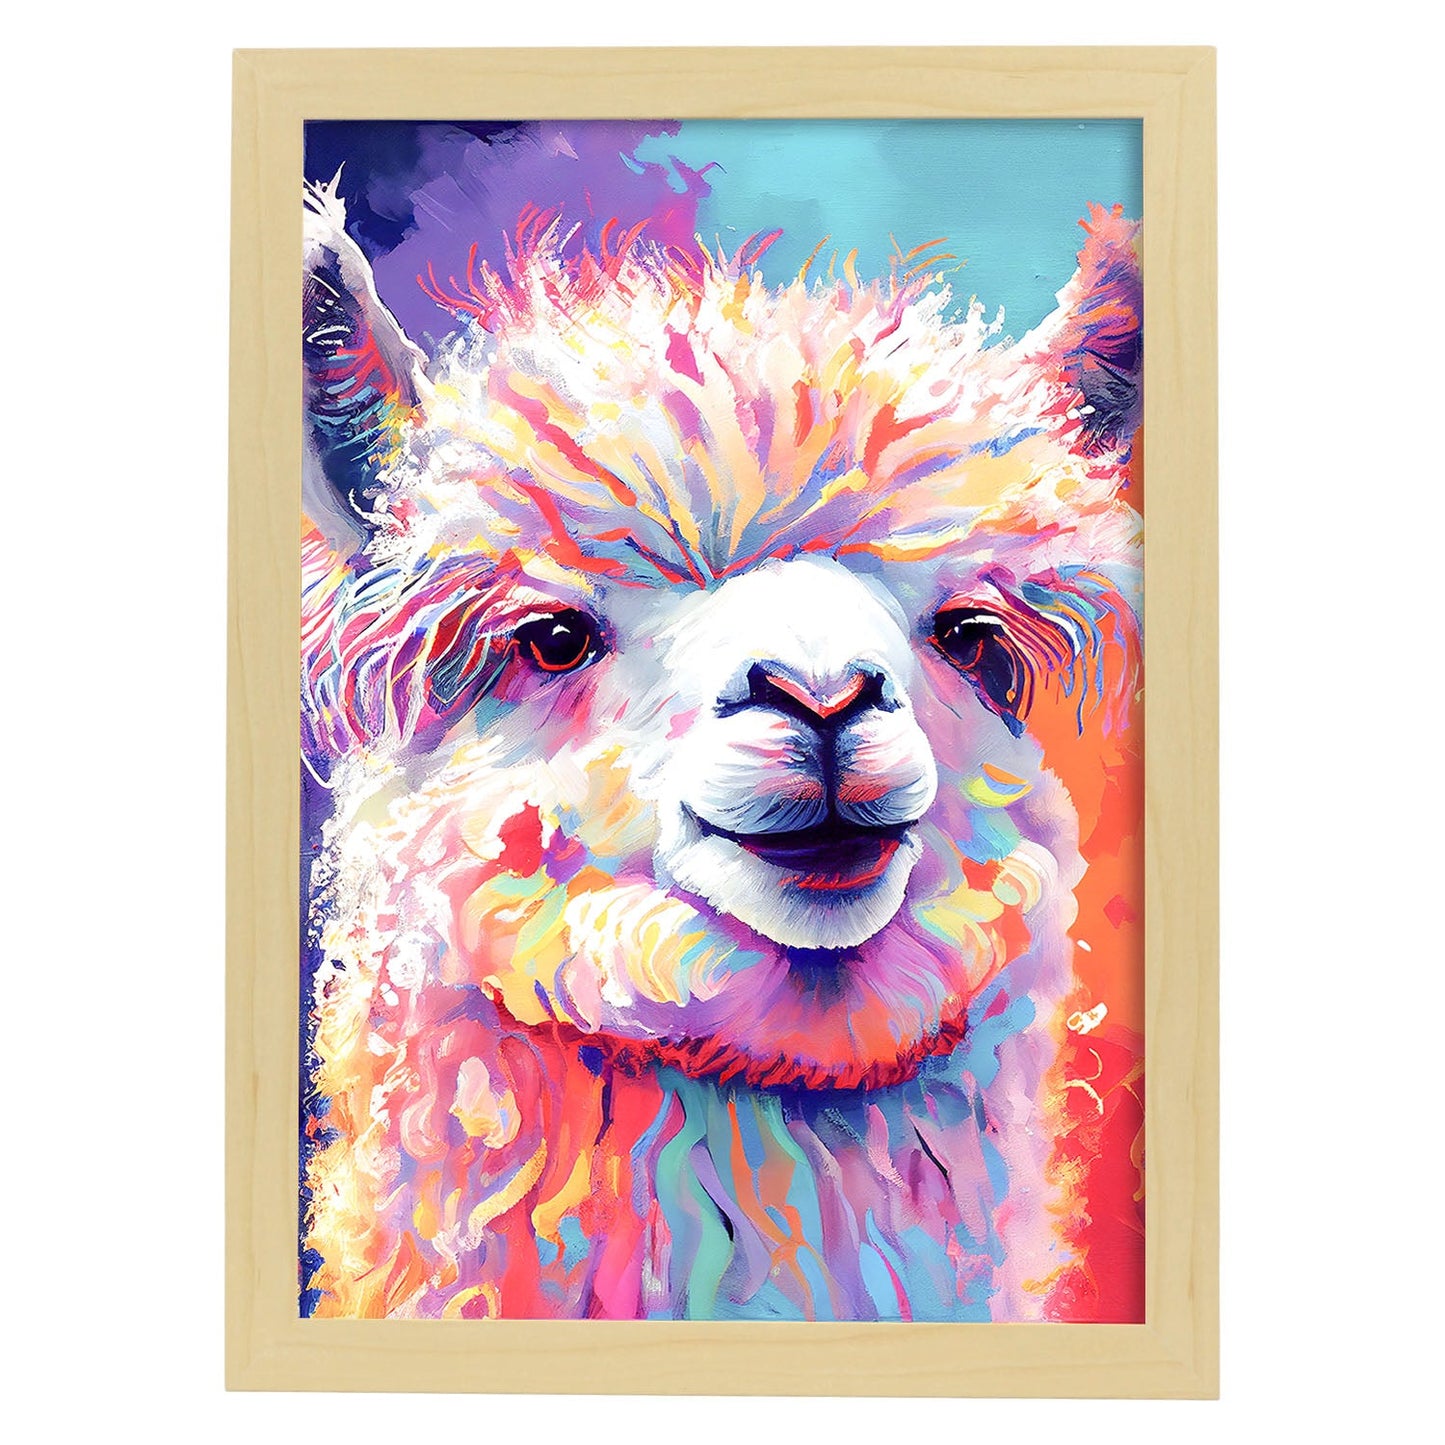 Nacnic Abstract smiling Alpaca in Lisa Fran Style_1. Aesthetic Wall Art Prints for Bedroom or Living Room Design.